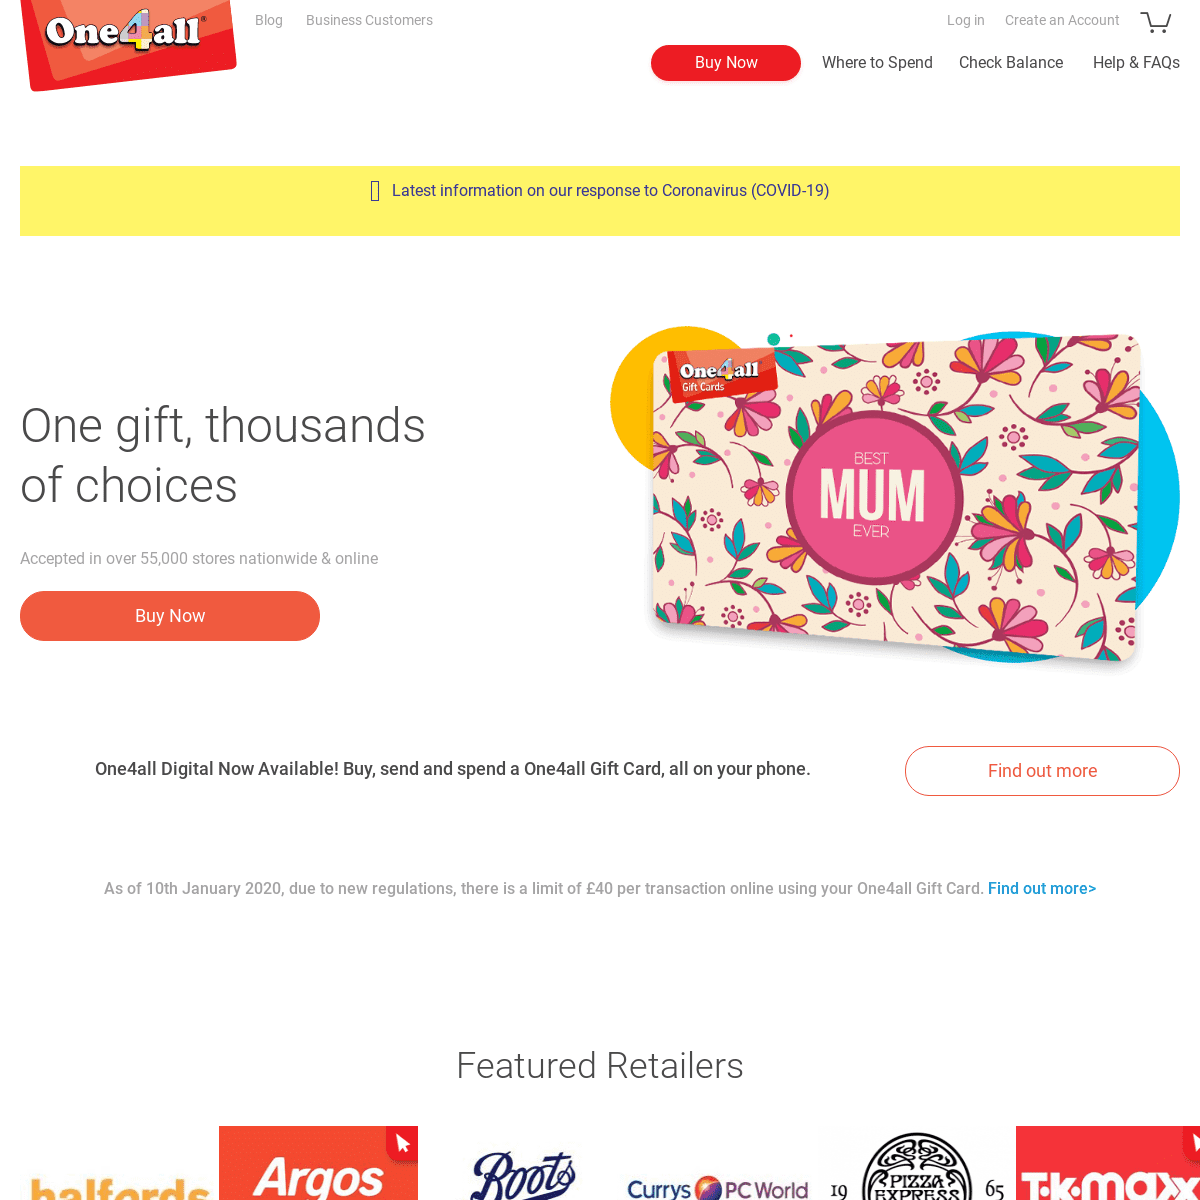 A complete backup of one4allgiftcard.co.uk